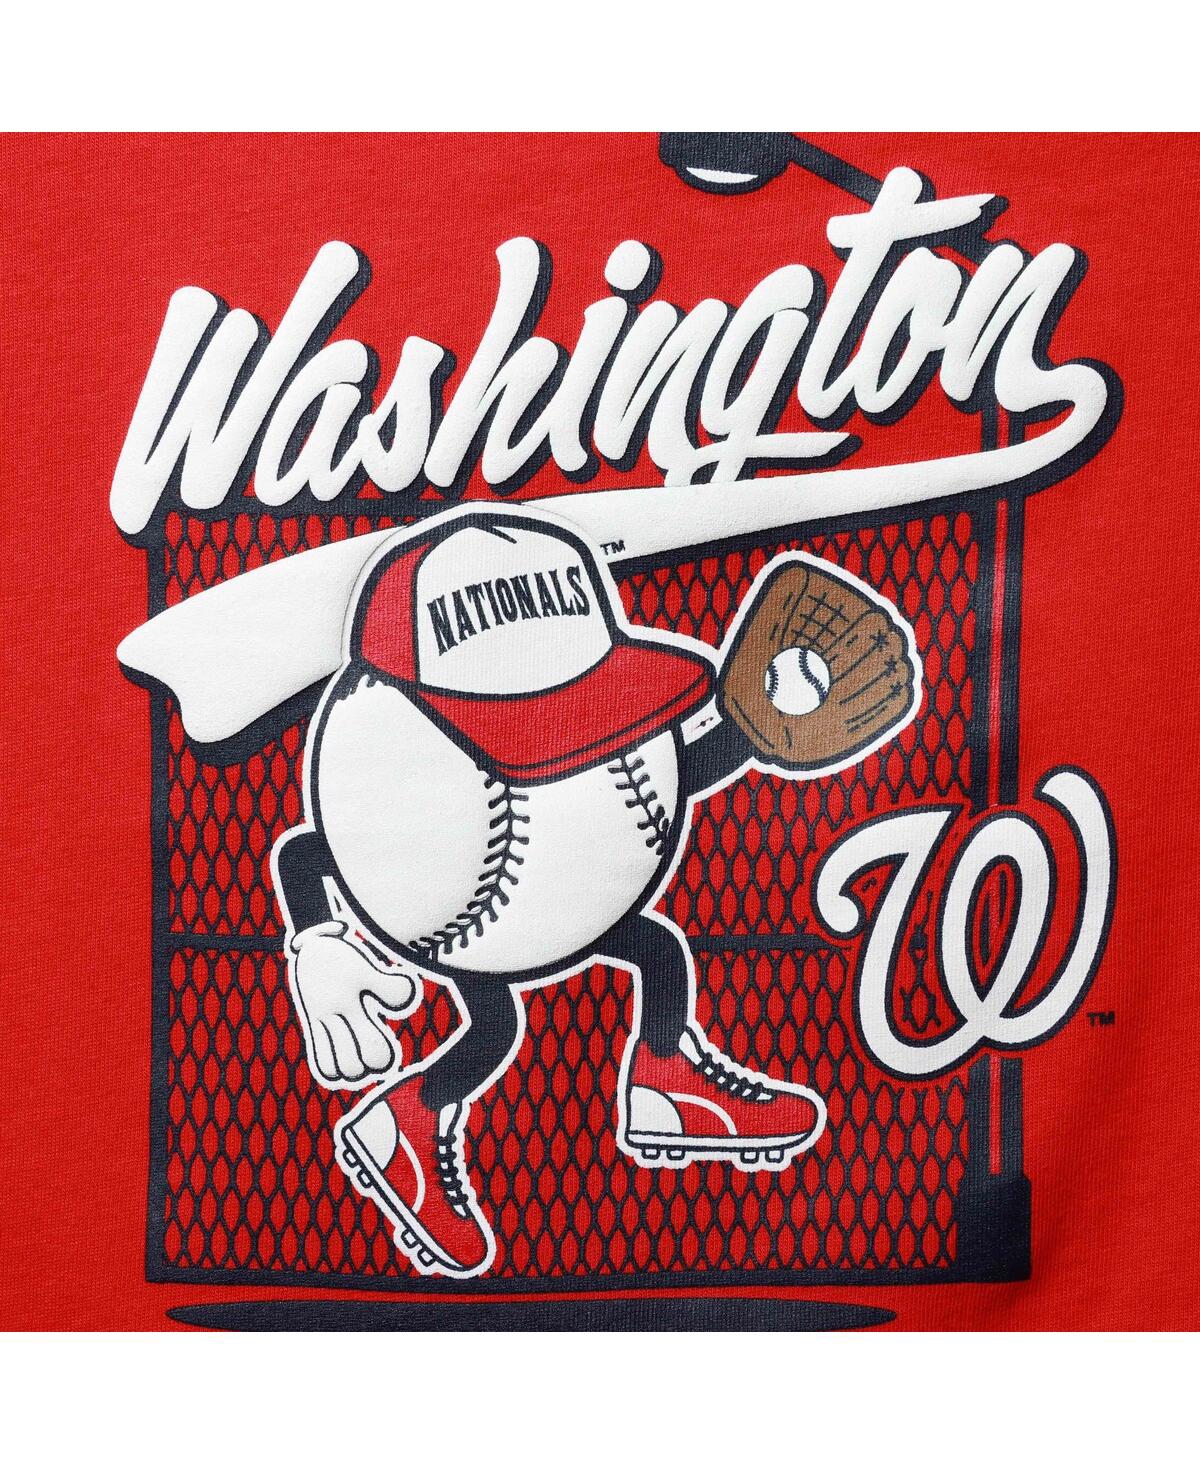 Shop Outerstuff Toddler Boys And Girls Red Washington Nationals On The Fence T-shirt